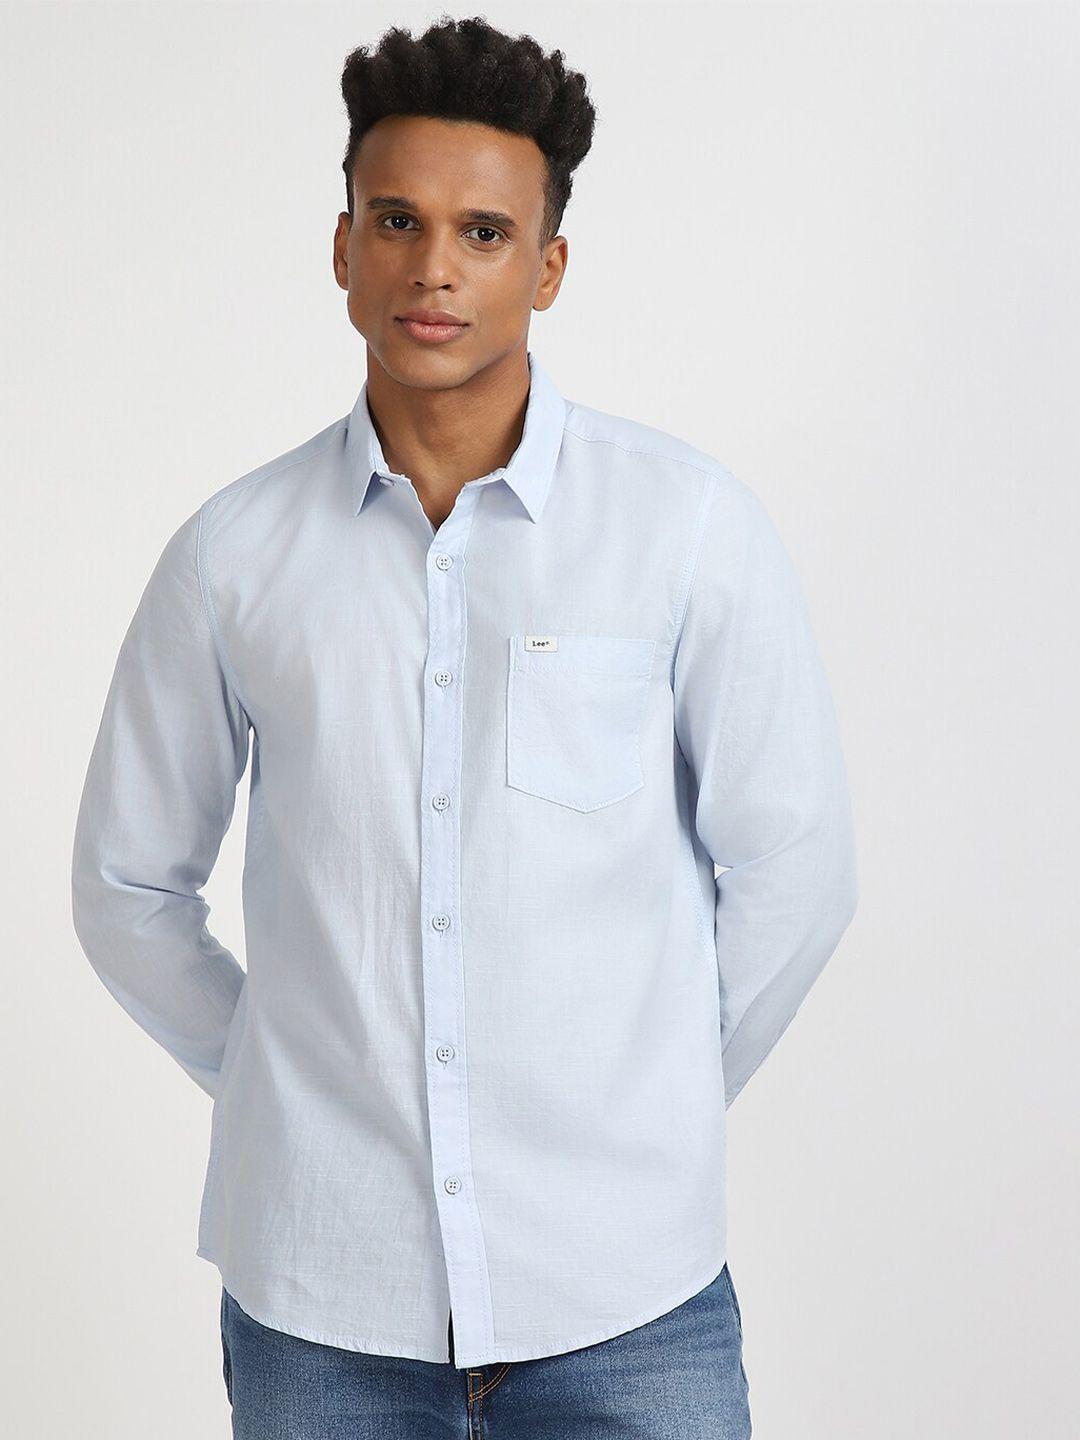 lee-spread-collar-cotton-casual-slim-fit-shirt